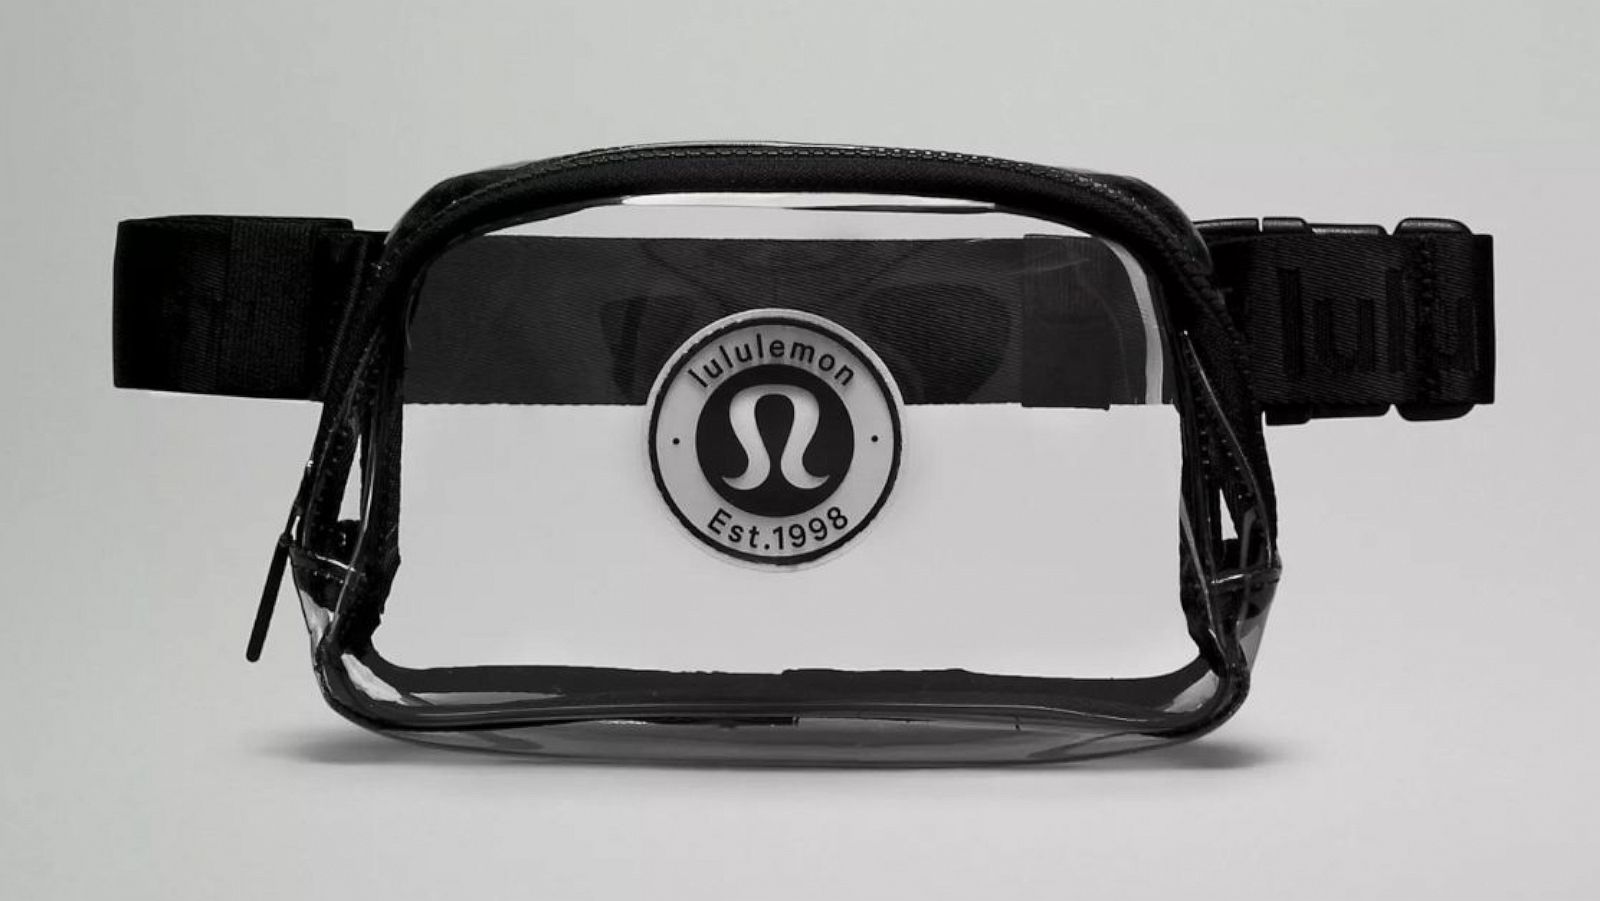 Lululemon now has a clear belt bag: Shop it while you can - Good